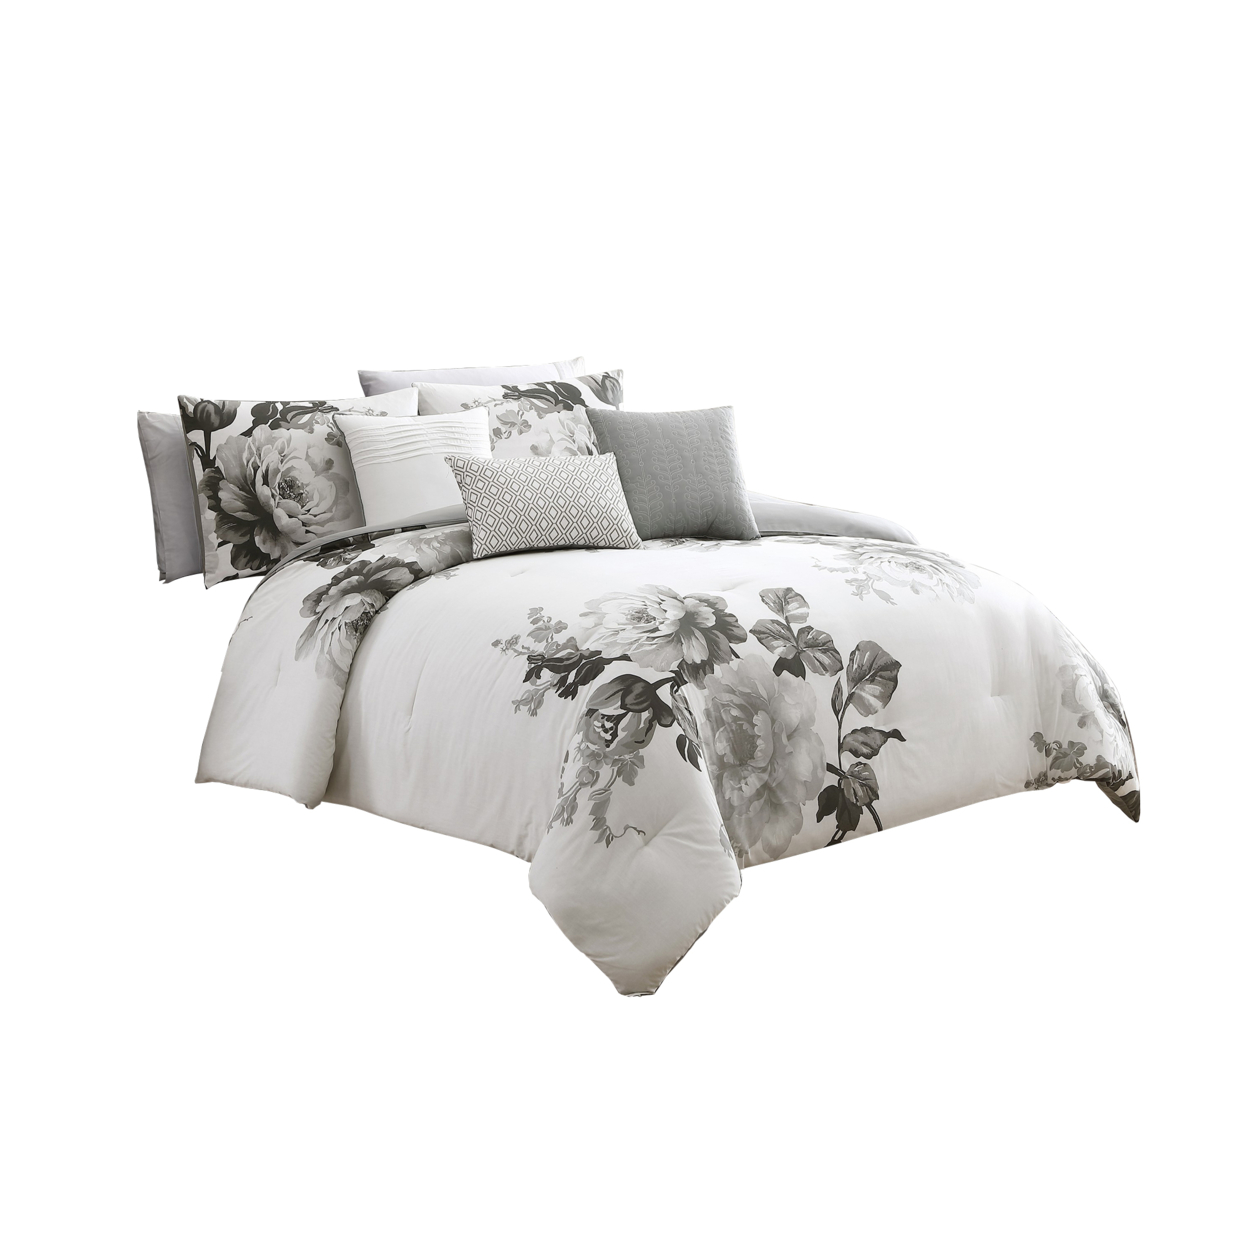 7 Piece Cotton King Comforter Set With Floral Print, Gray And White- Saltoro Sherpi